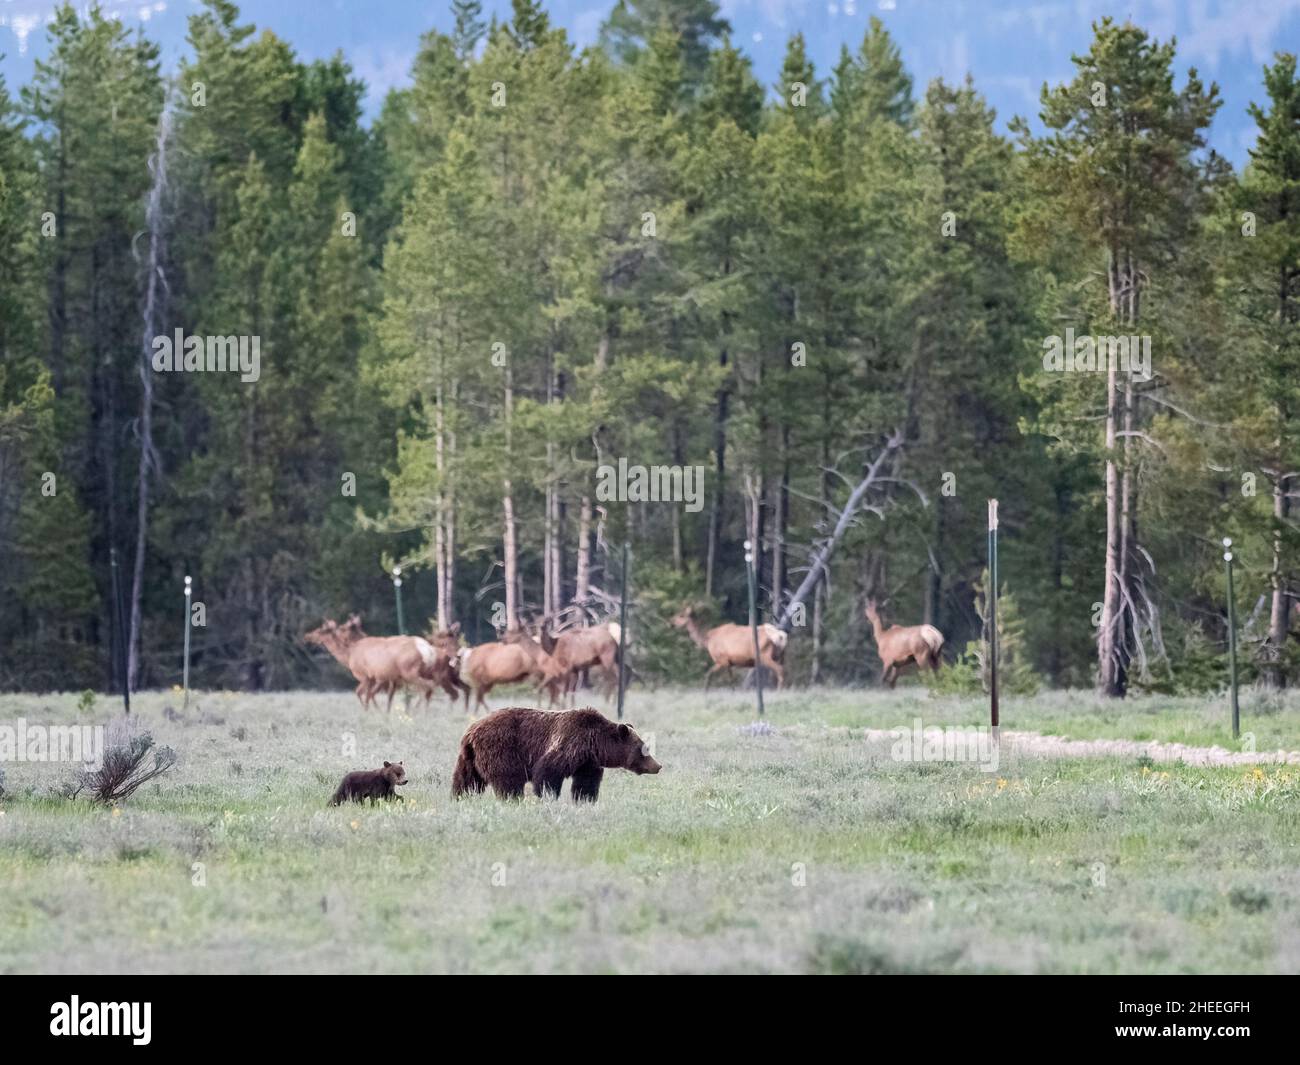 A mother grizzly bear (Ursus arctos), and her cub cross paths with a herd of deer, near Grand Teton National Park, Wyoming. Stock Photo